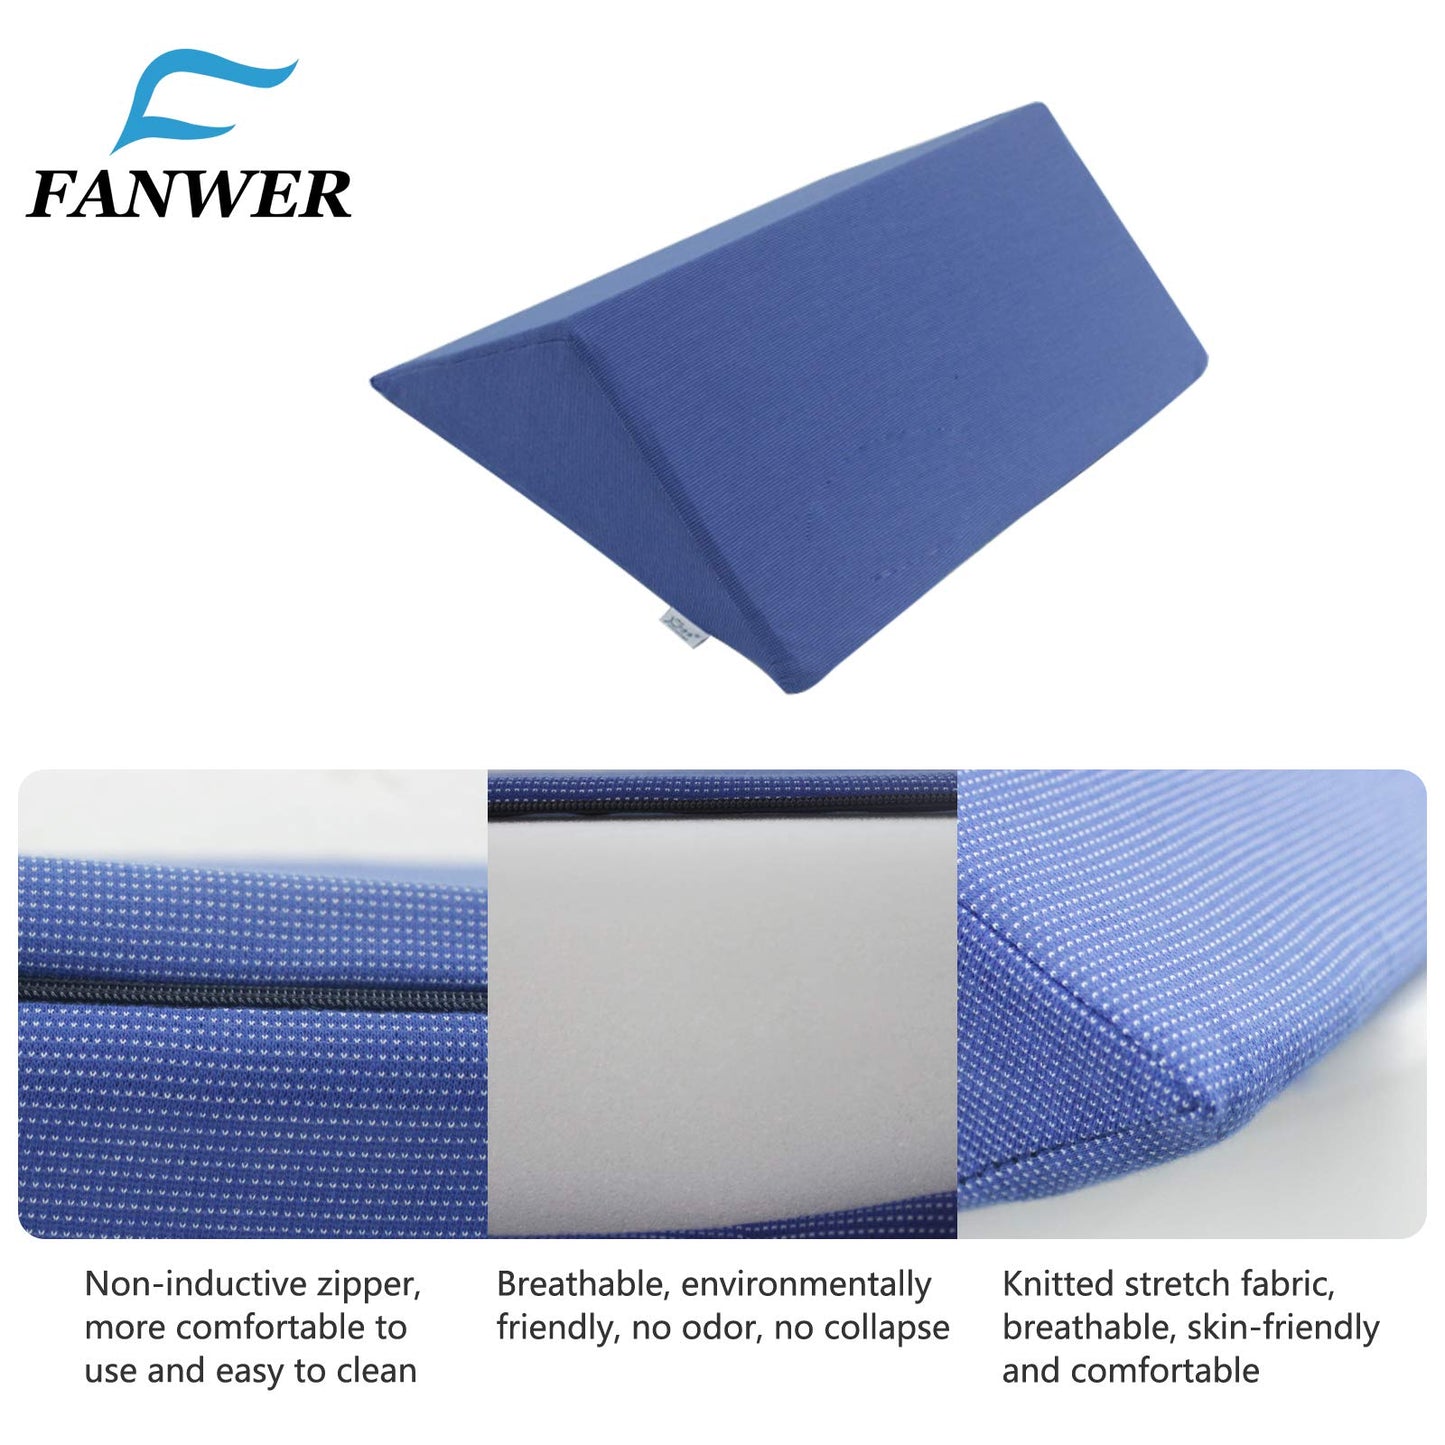 Fanwer Leg Elevation Pillows for Swelling, Wedge Pillows for After Surgery